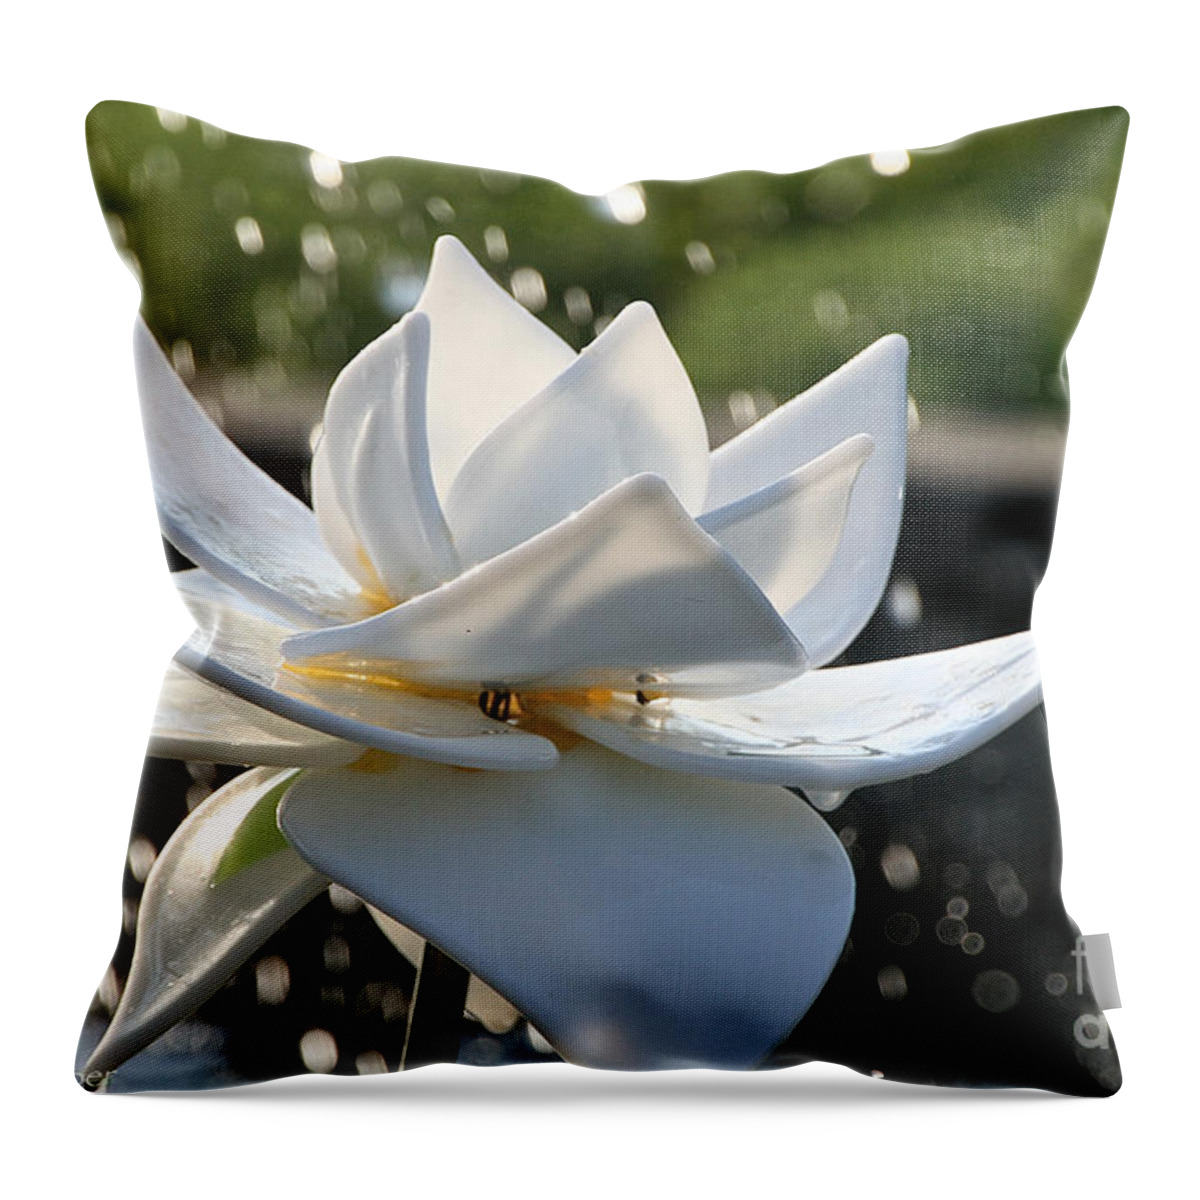 Glass Throw Pillow featuring the photograph Opaque Lily by Susan Herber